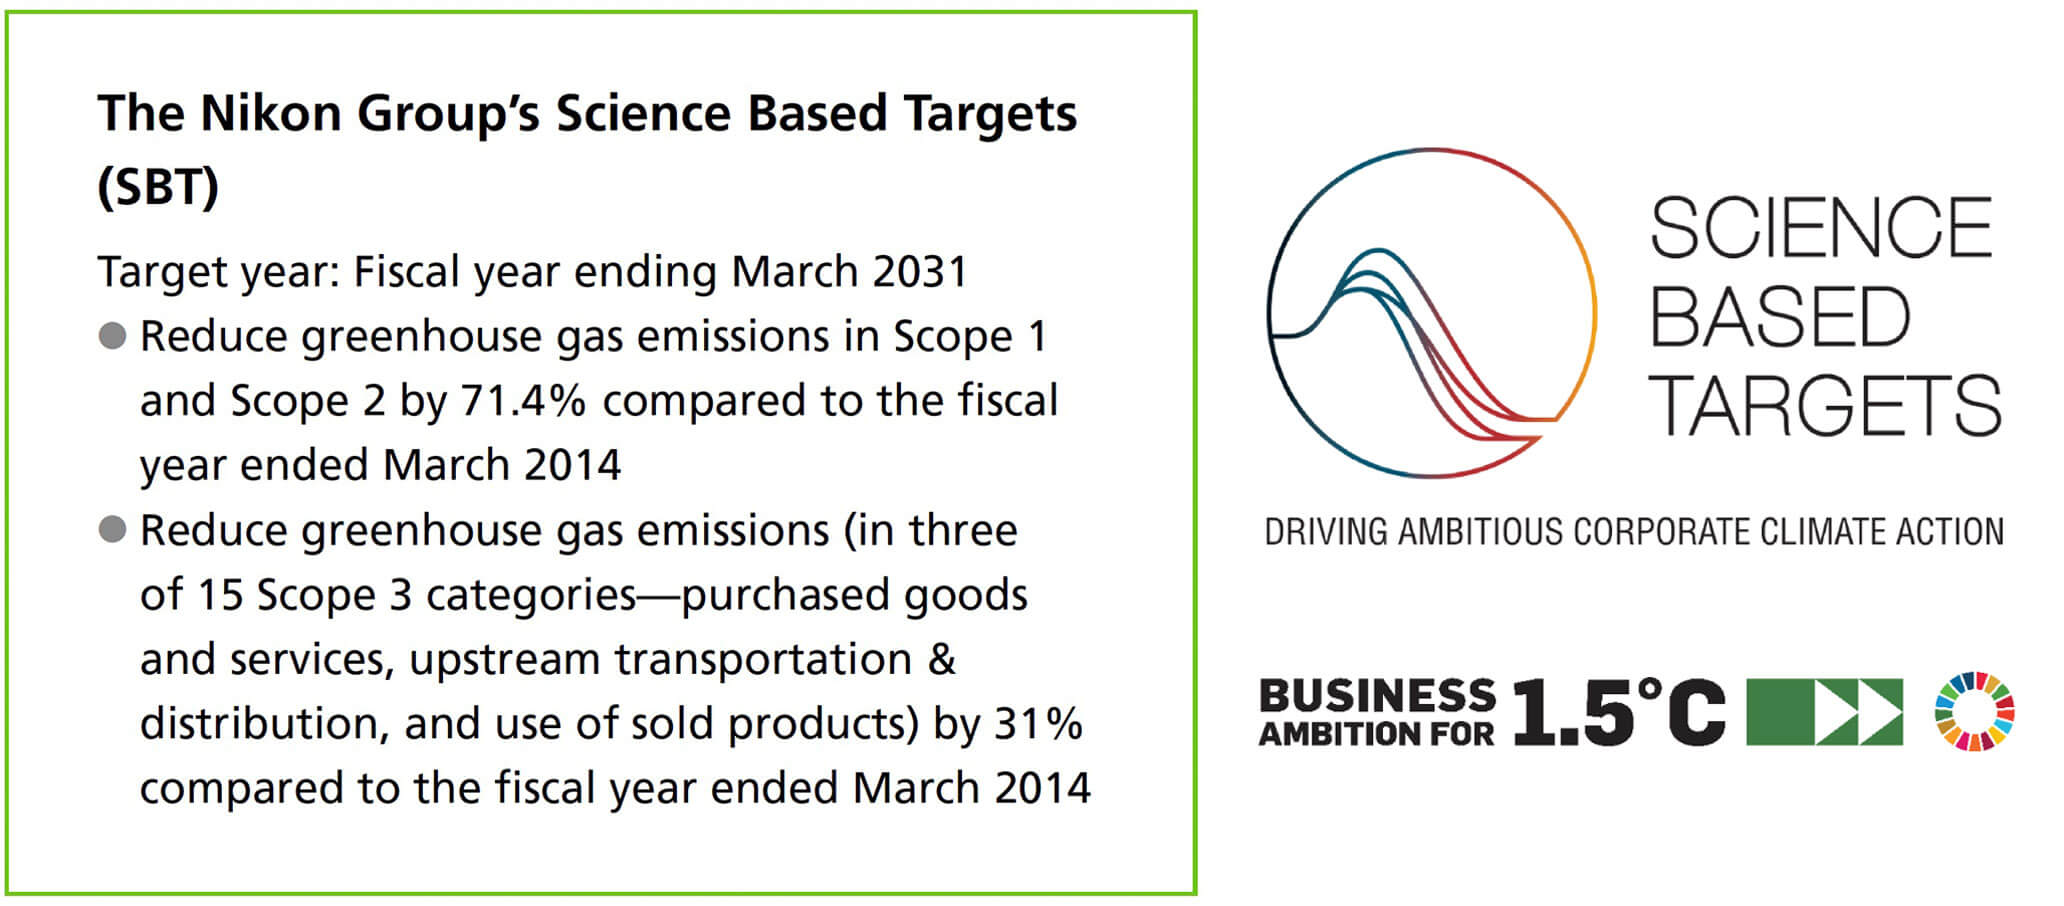 The Nikon Group's Science Based Targets (SBT) / Target year: Fiscal year ending March 2031 • Reduce greenhouse gas emissions in Scope 1 and Scope 2 by 71.4% compared to the fiscal year ended March 2014 • Reduce greenhouse gas emissions (in three of 15 Scope 3 categories-purchased goods and services, upstream transportation & distribution, and use of sold products) by 31% compared to the fiscal year ended March 2014 / SCIENCE BASED TARGETS DRIVING AMBITIOUS CORPORATE CLIMATE ACTION / BUSINESS AMBITION FOR 1.5℃